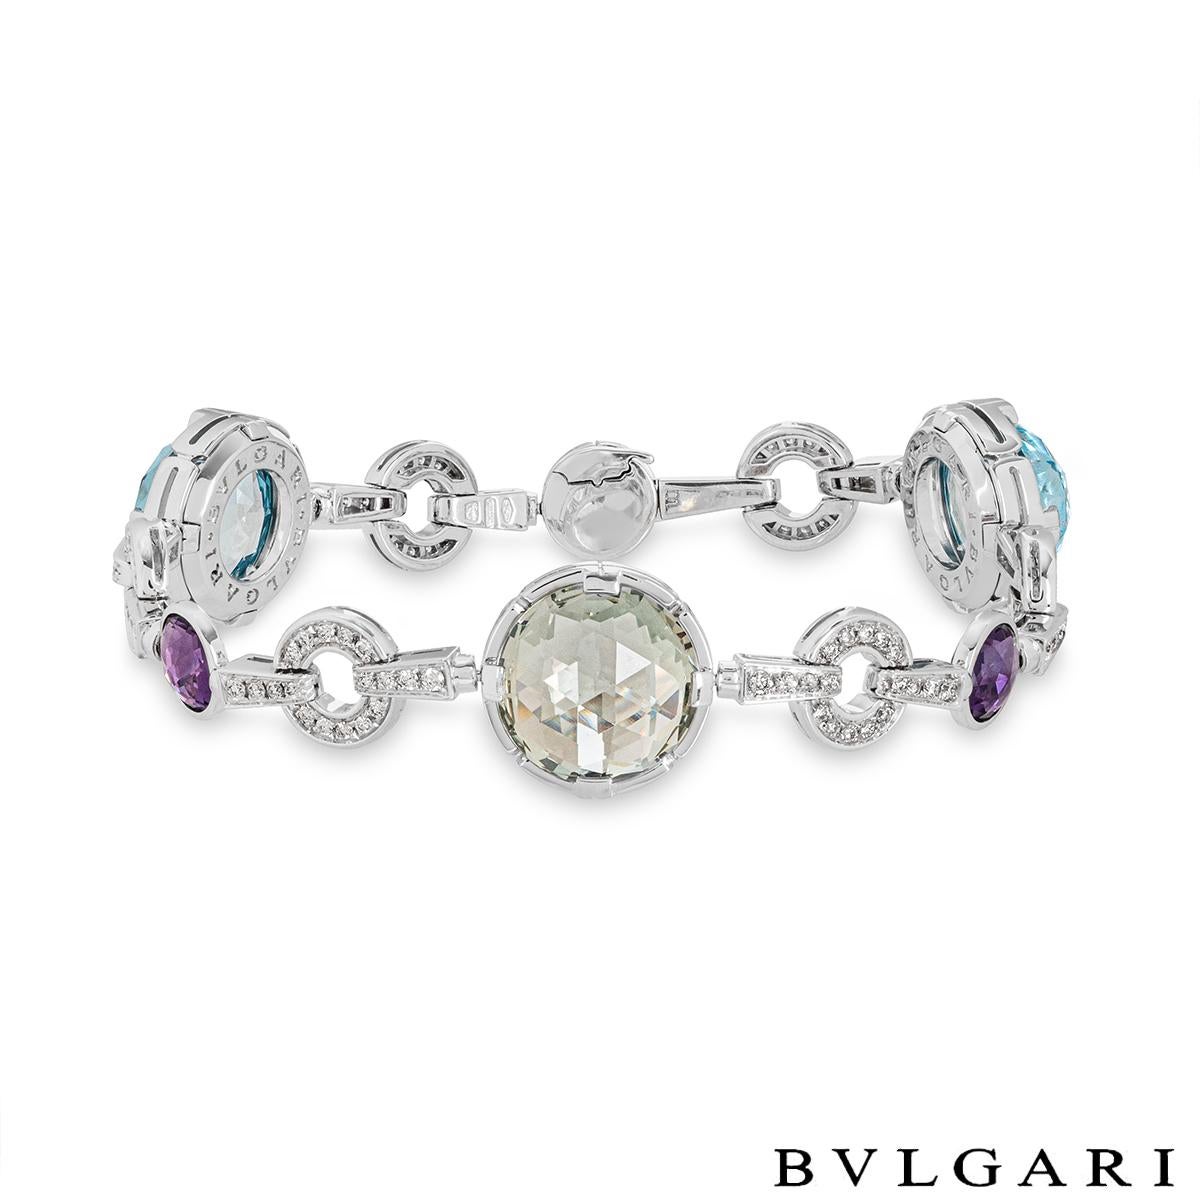 An alluring 18k white gold multi-gemstone and diamond bracelet by Bvlgari from the Parentesi collection. The bracelet features 1 prasiolite, 2 topaz stones and 3 amethyst stones rose cut in a modern setting and evenly spaced throughout. Accentuating